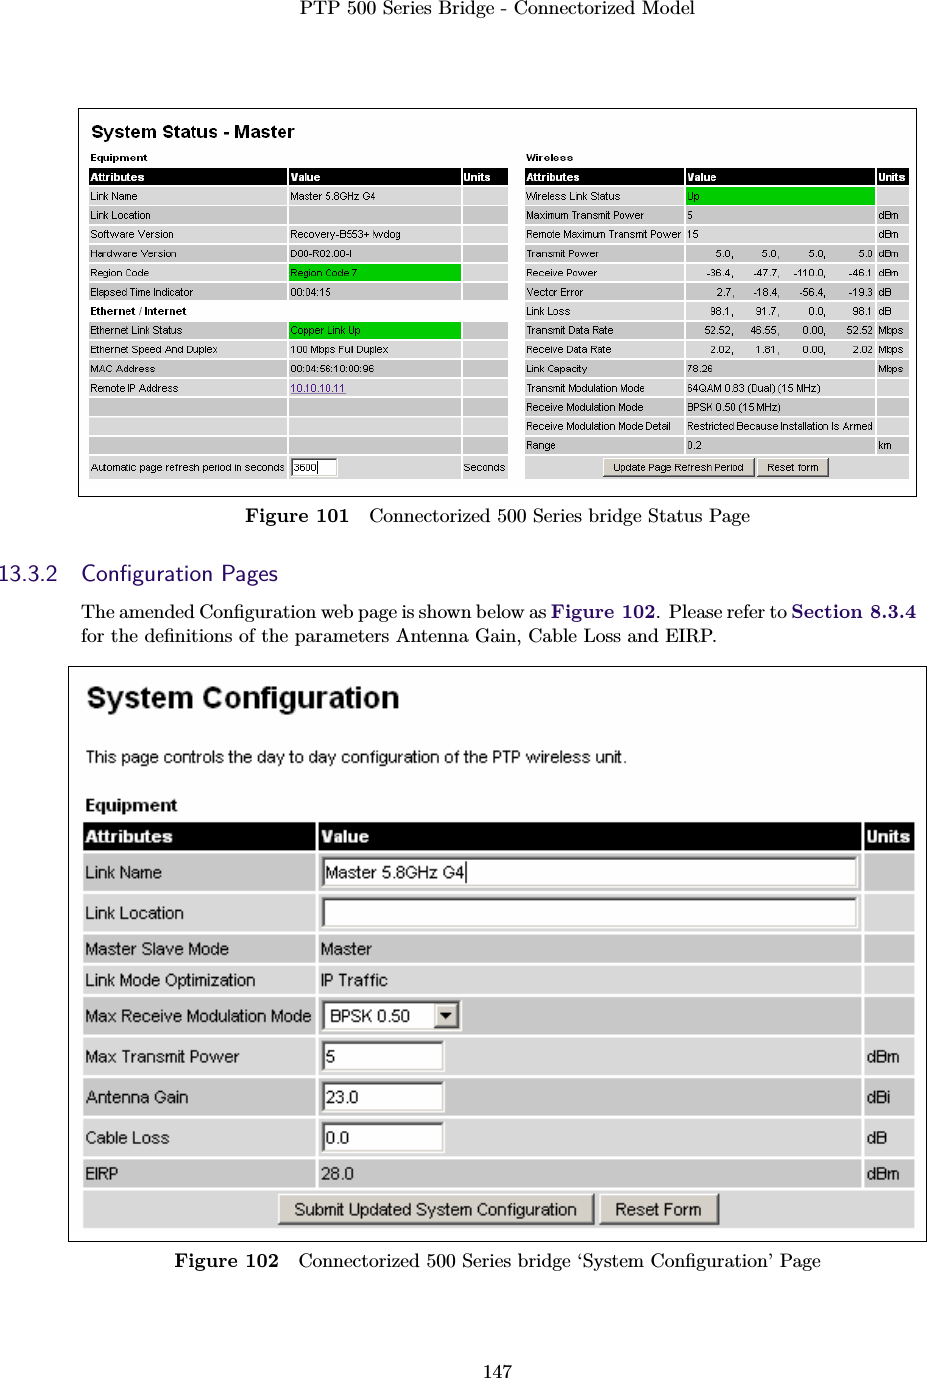 PTP 500 Series Bridge - Connectorized Model147Figure 101 Connectorized 500 Series bridge Status Page13.3.2 Conﬁguration PagesThe amended Conﬁguration web page is shown below as Figure 102. Please refer to Section 8.3.4for the deﬁnitions of the parameters Antenna Gain, Cable Loss and EIRP.Figure 102 Connectorized 500 Series bridge ‘System Conﬁguration’ Page